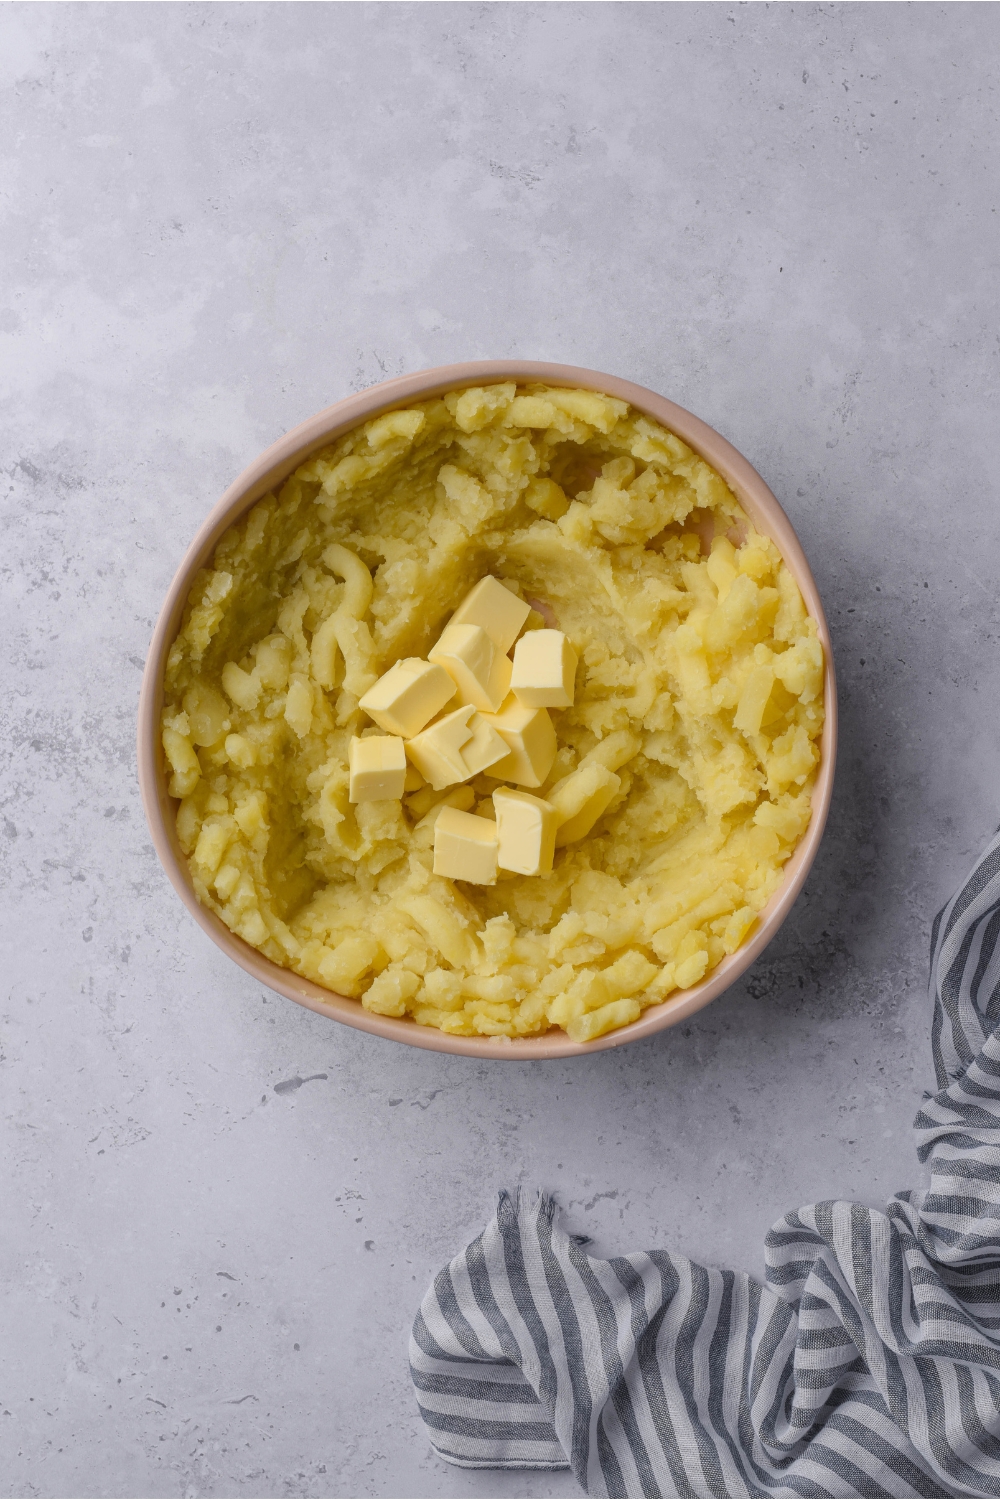 A bowl of mashed potatoes with a pile of cubed butter in the center of the bowl.